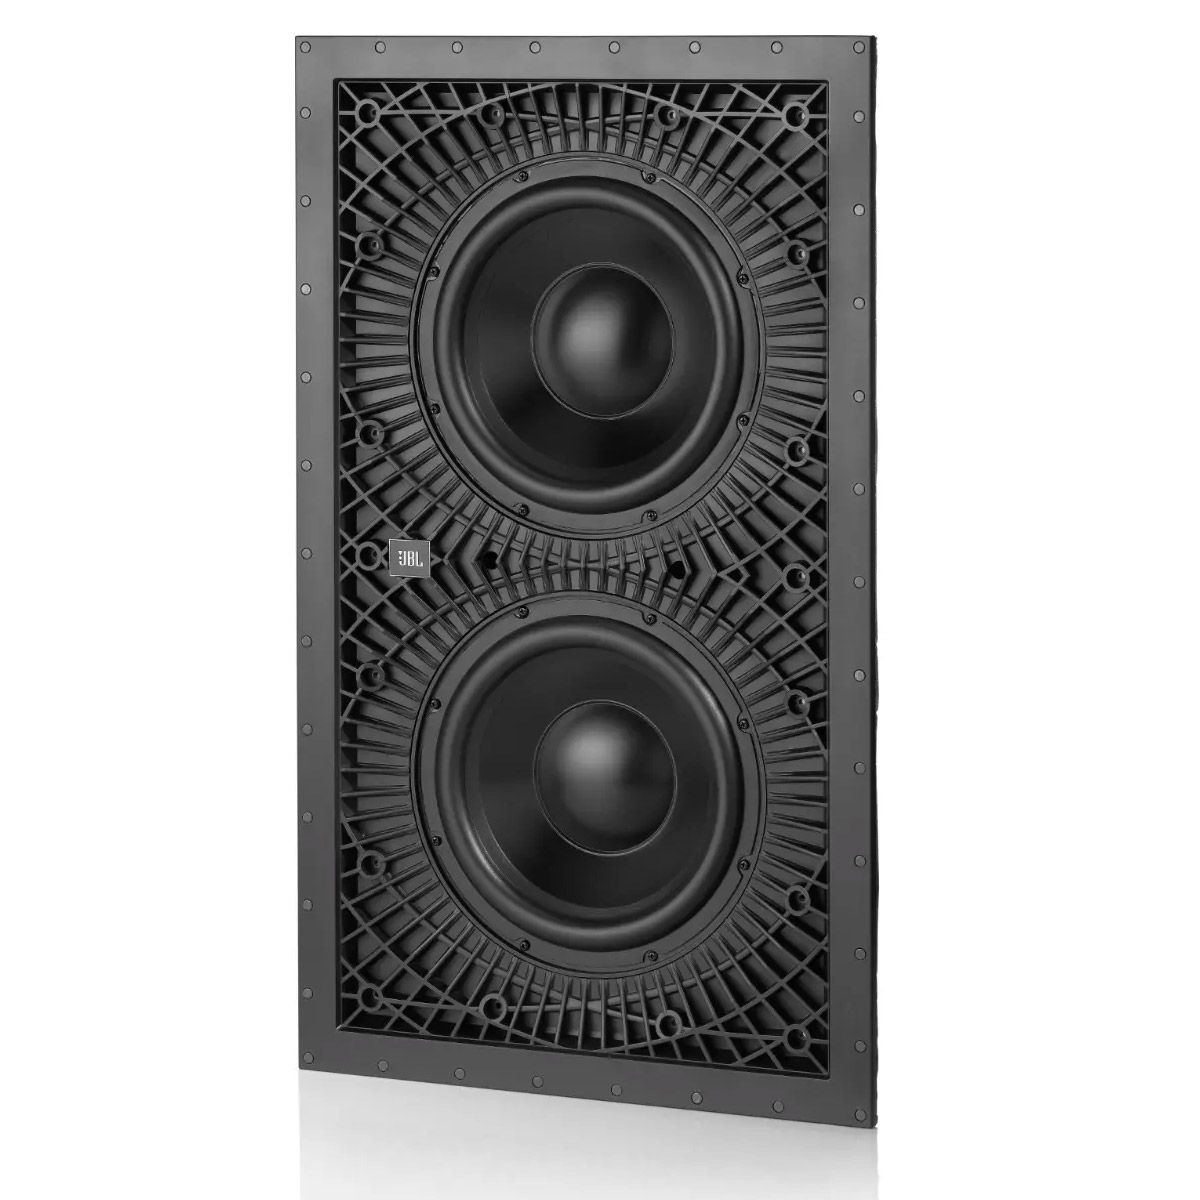 JBL Synthesis SSW-3 Dual 10" In-Wall Subwoofer